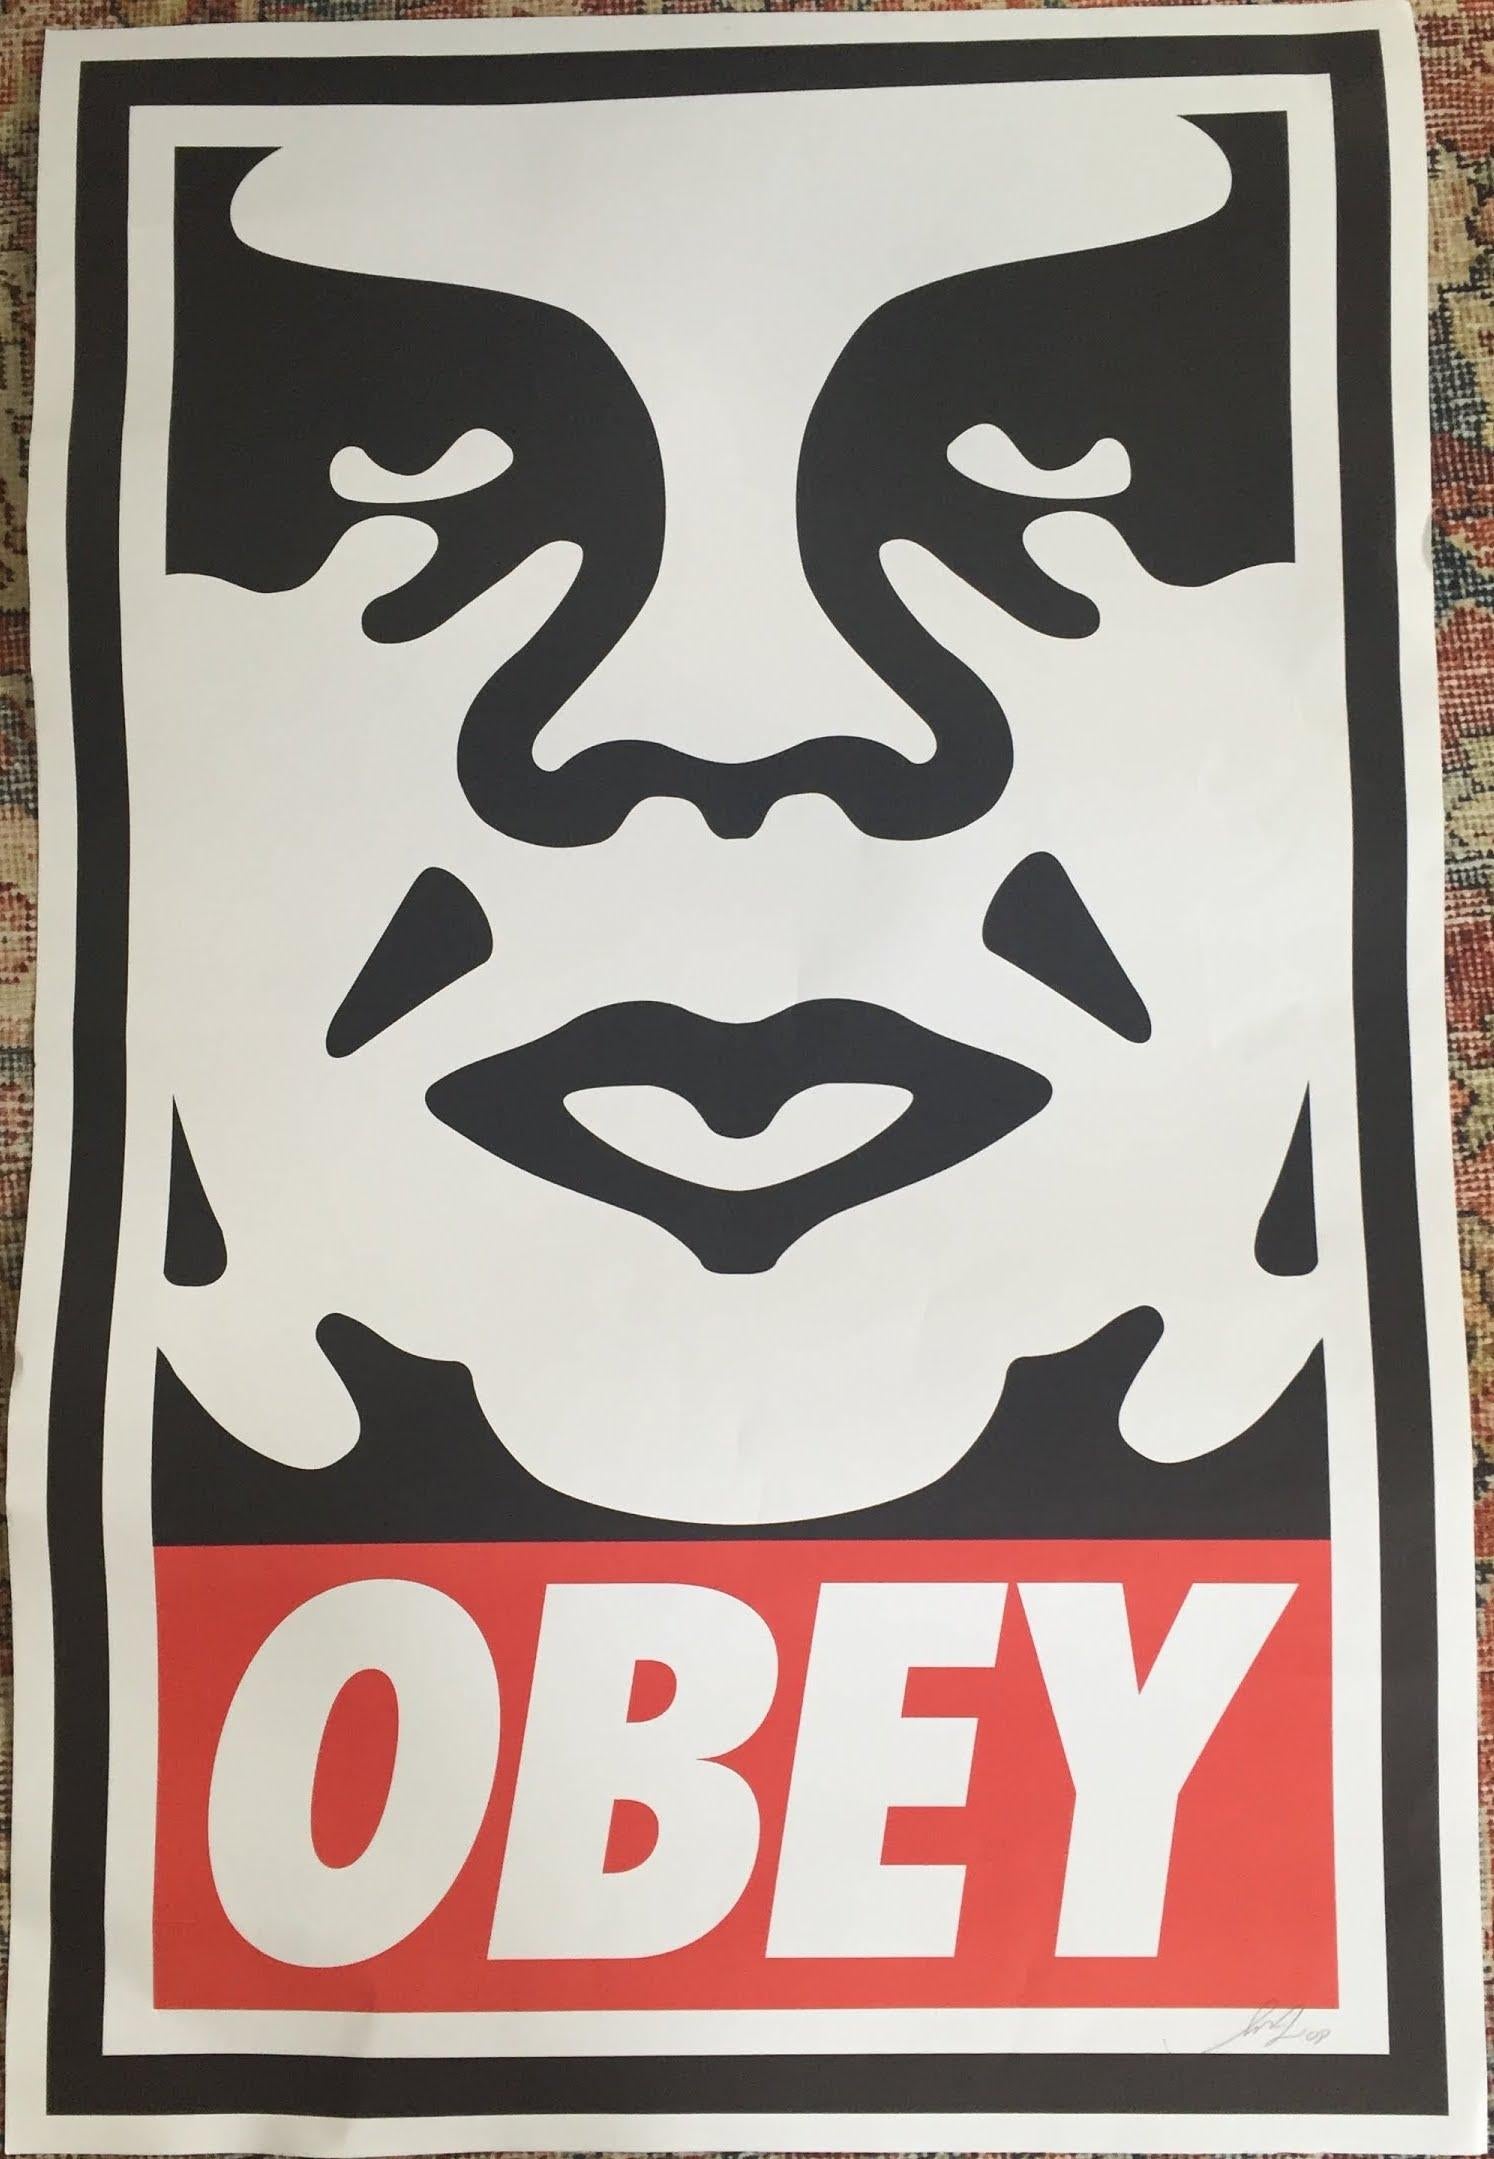 Obey [Andre the Giant] - Art by Shepard Fairey